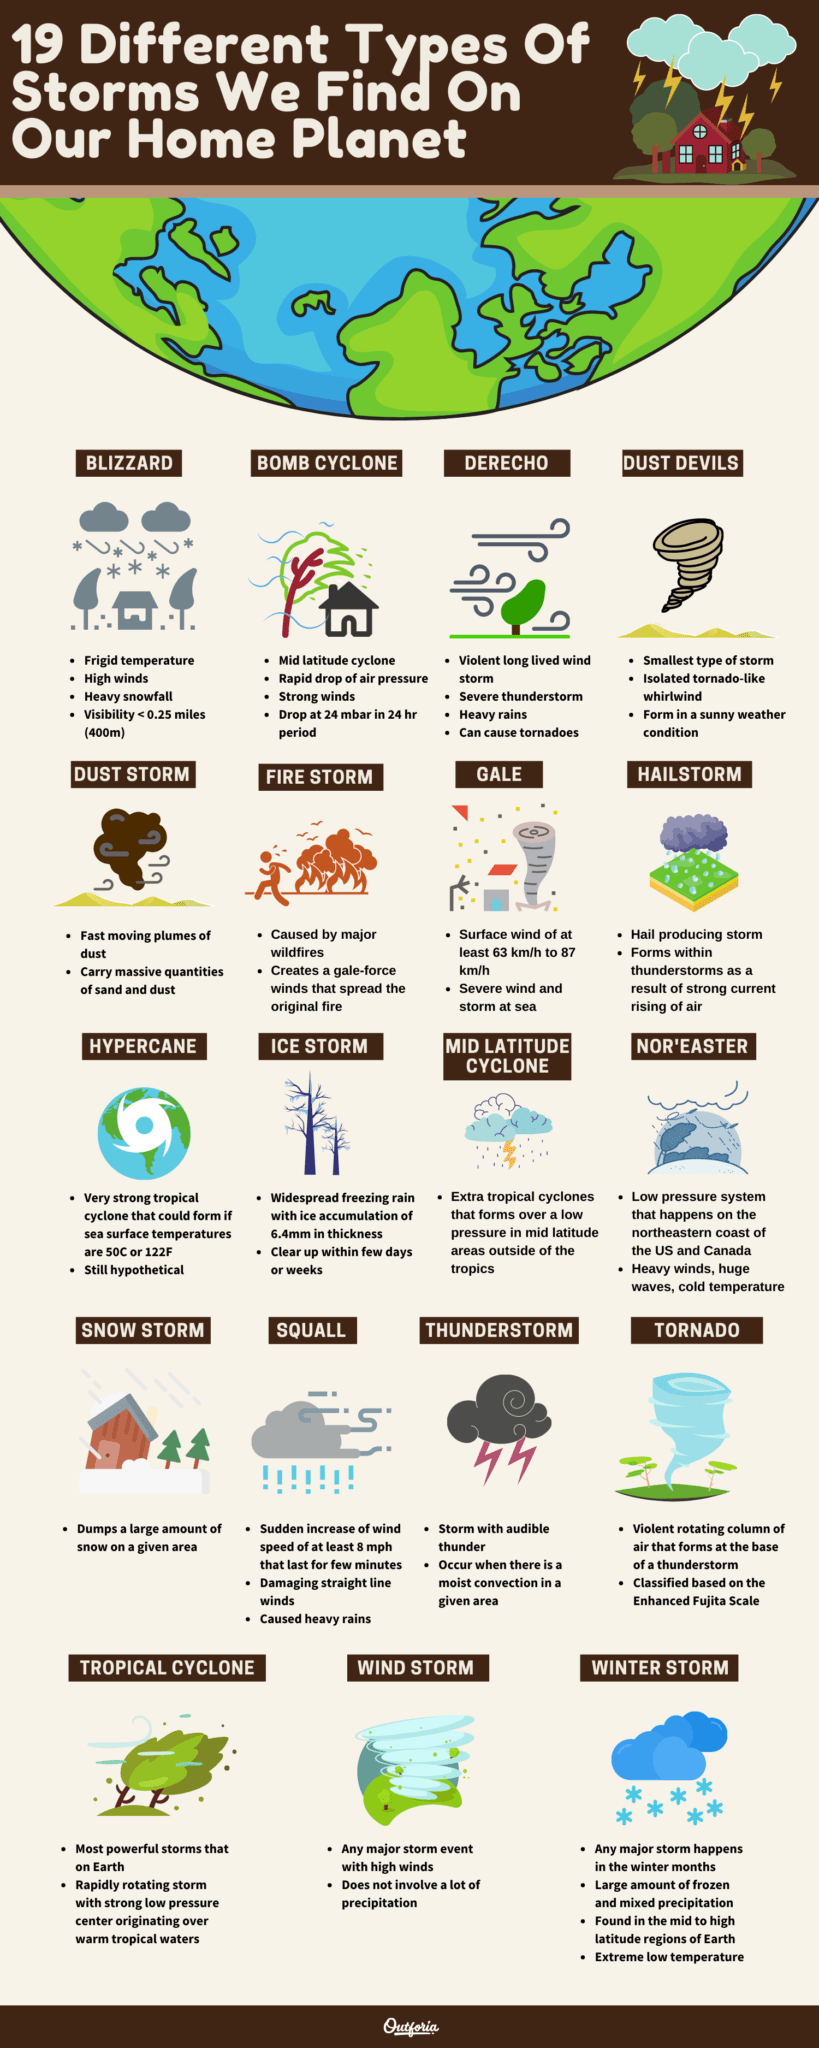 19 Incredible Types of Storms